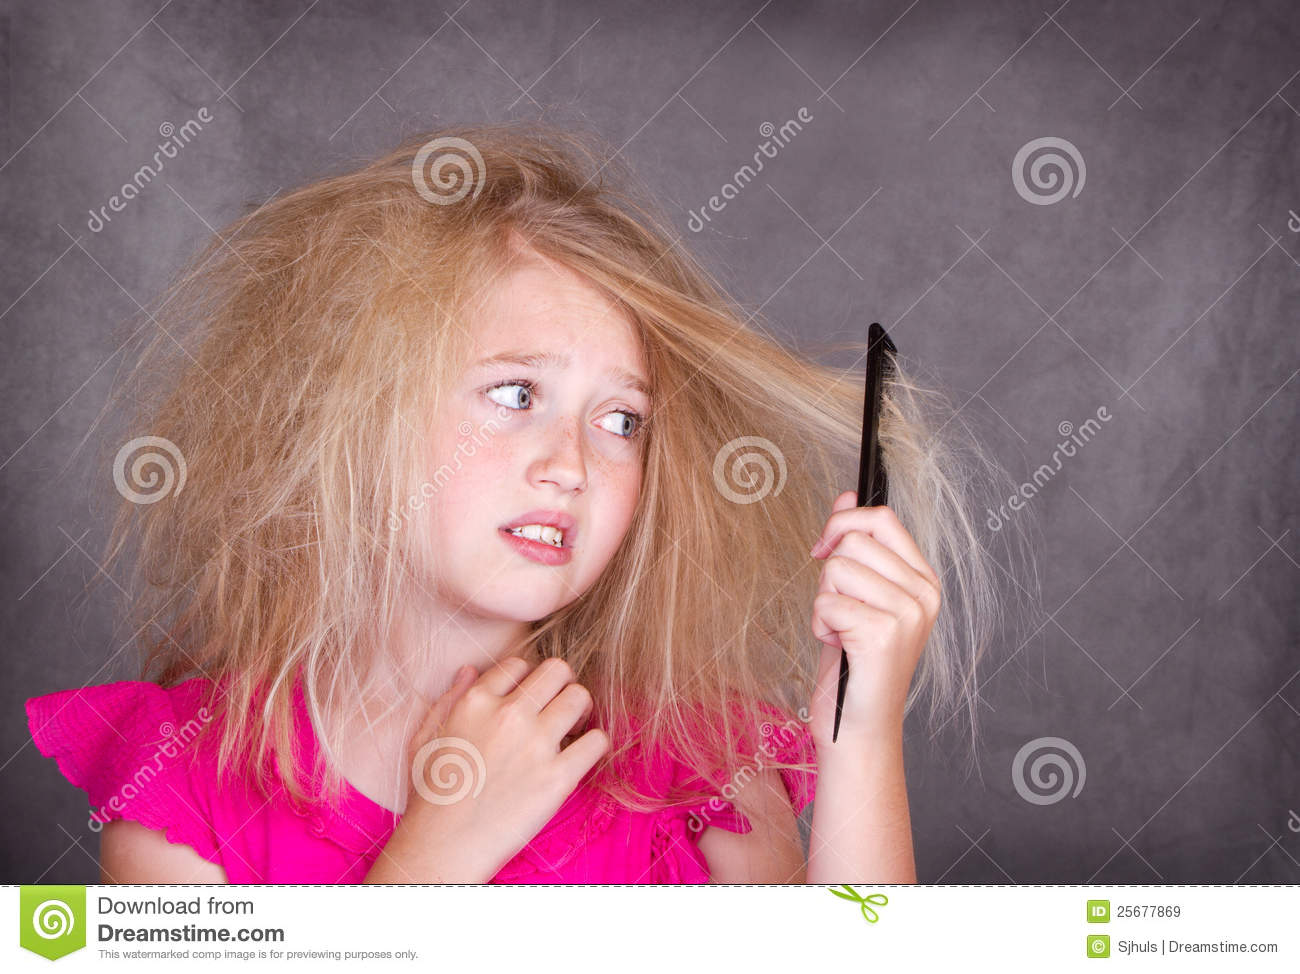 Girl With Crazy Tangled Hair Royalty Free Stock Images   Image